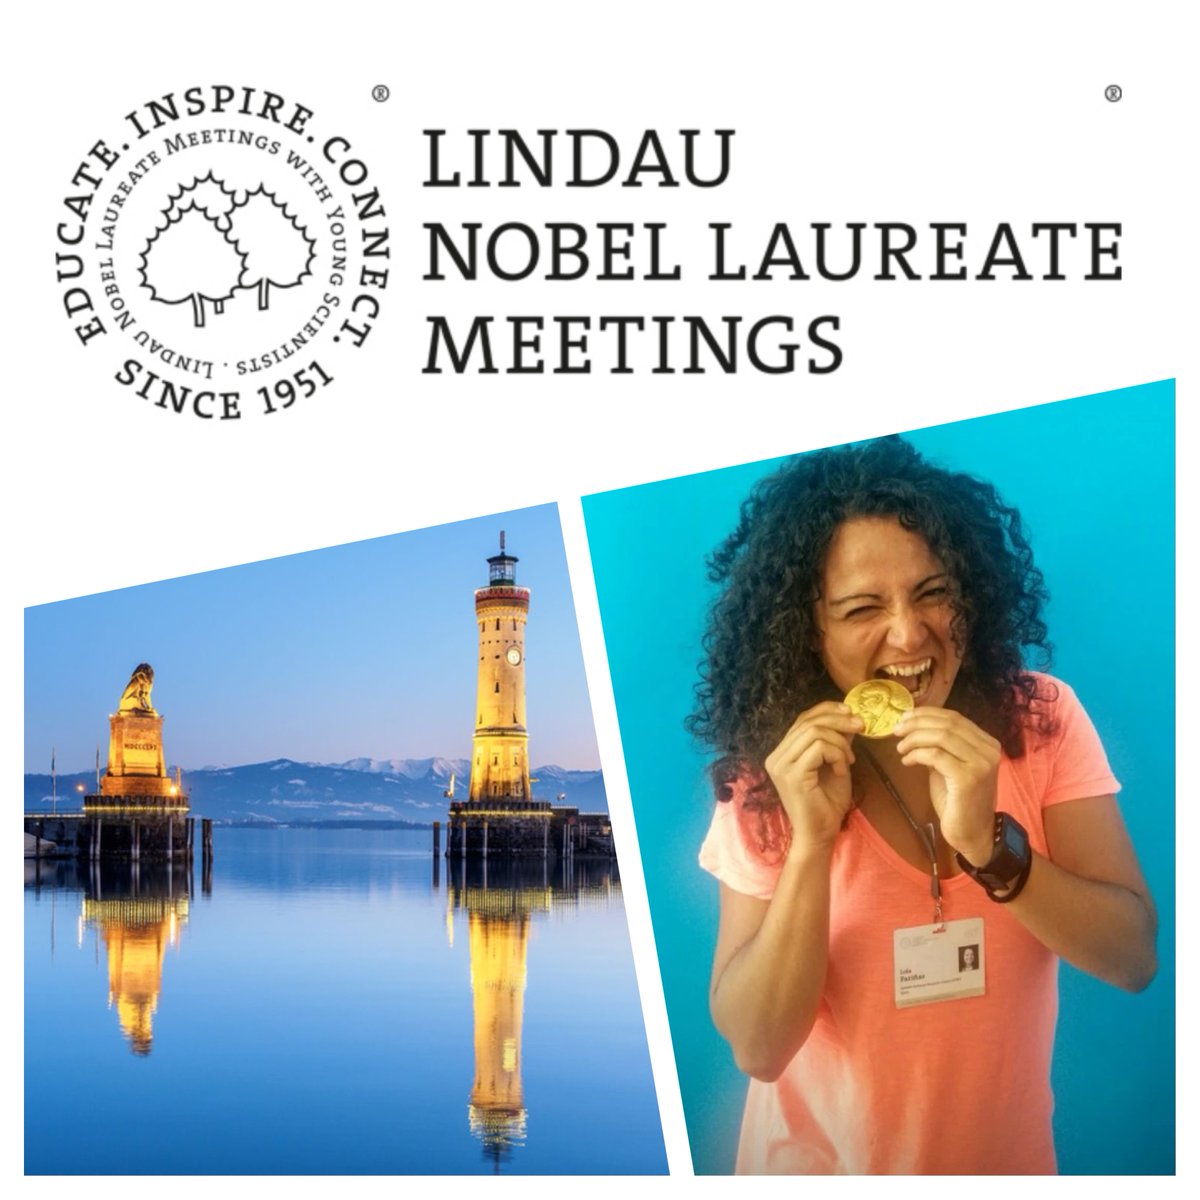 I am excited to announce that my 'Women in Research' blog will again highlight exceptional women in science before, during, & after the 73rd Lindau Nobel Laureate Meetings #LINO24. This year marks the 9th consecutive year of this initiative 😀👉 womeninresearchblog.wordpress.com